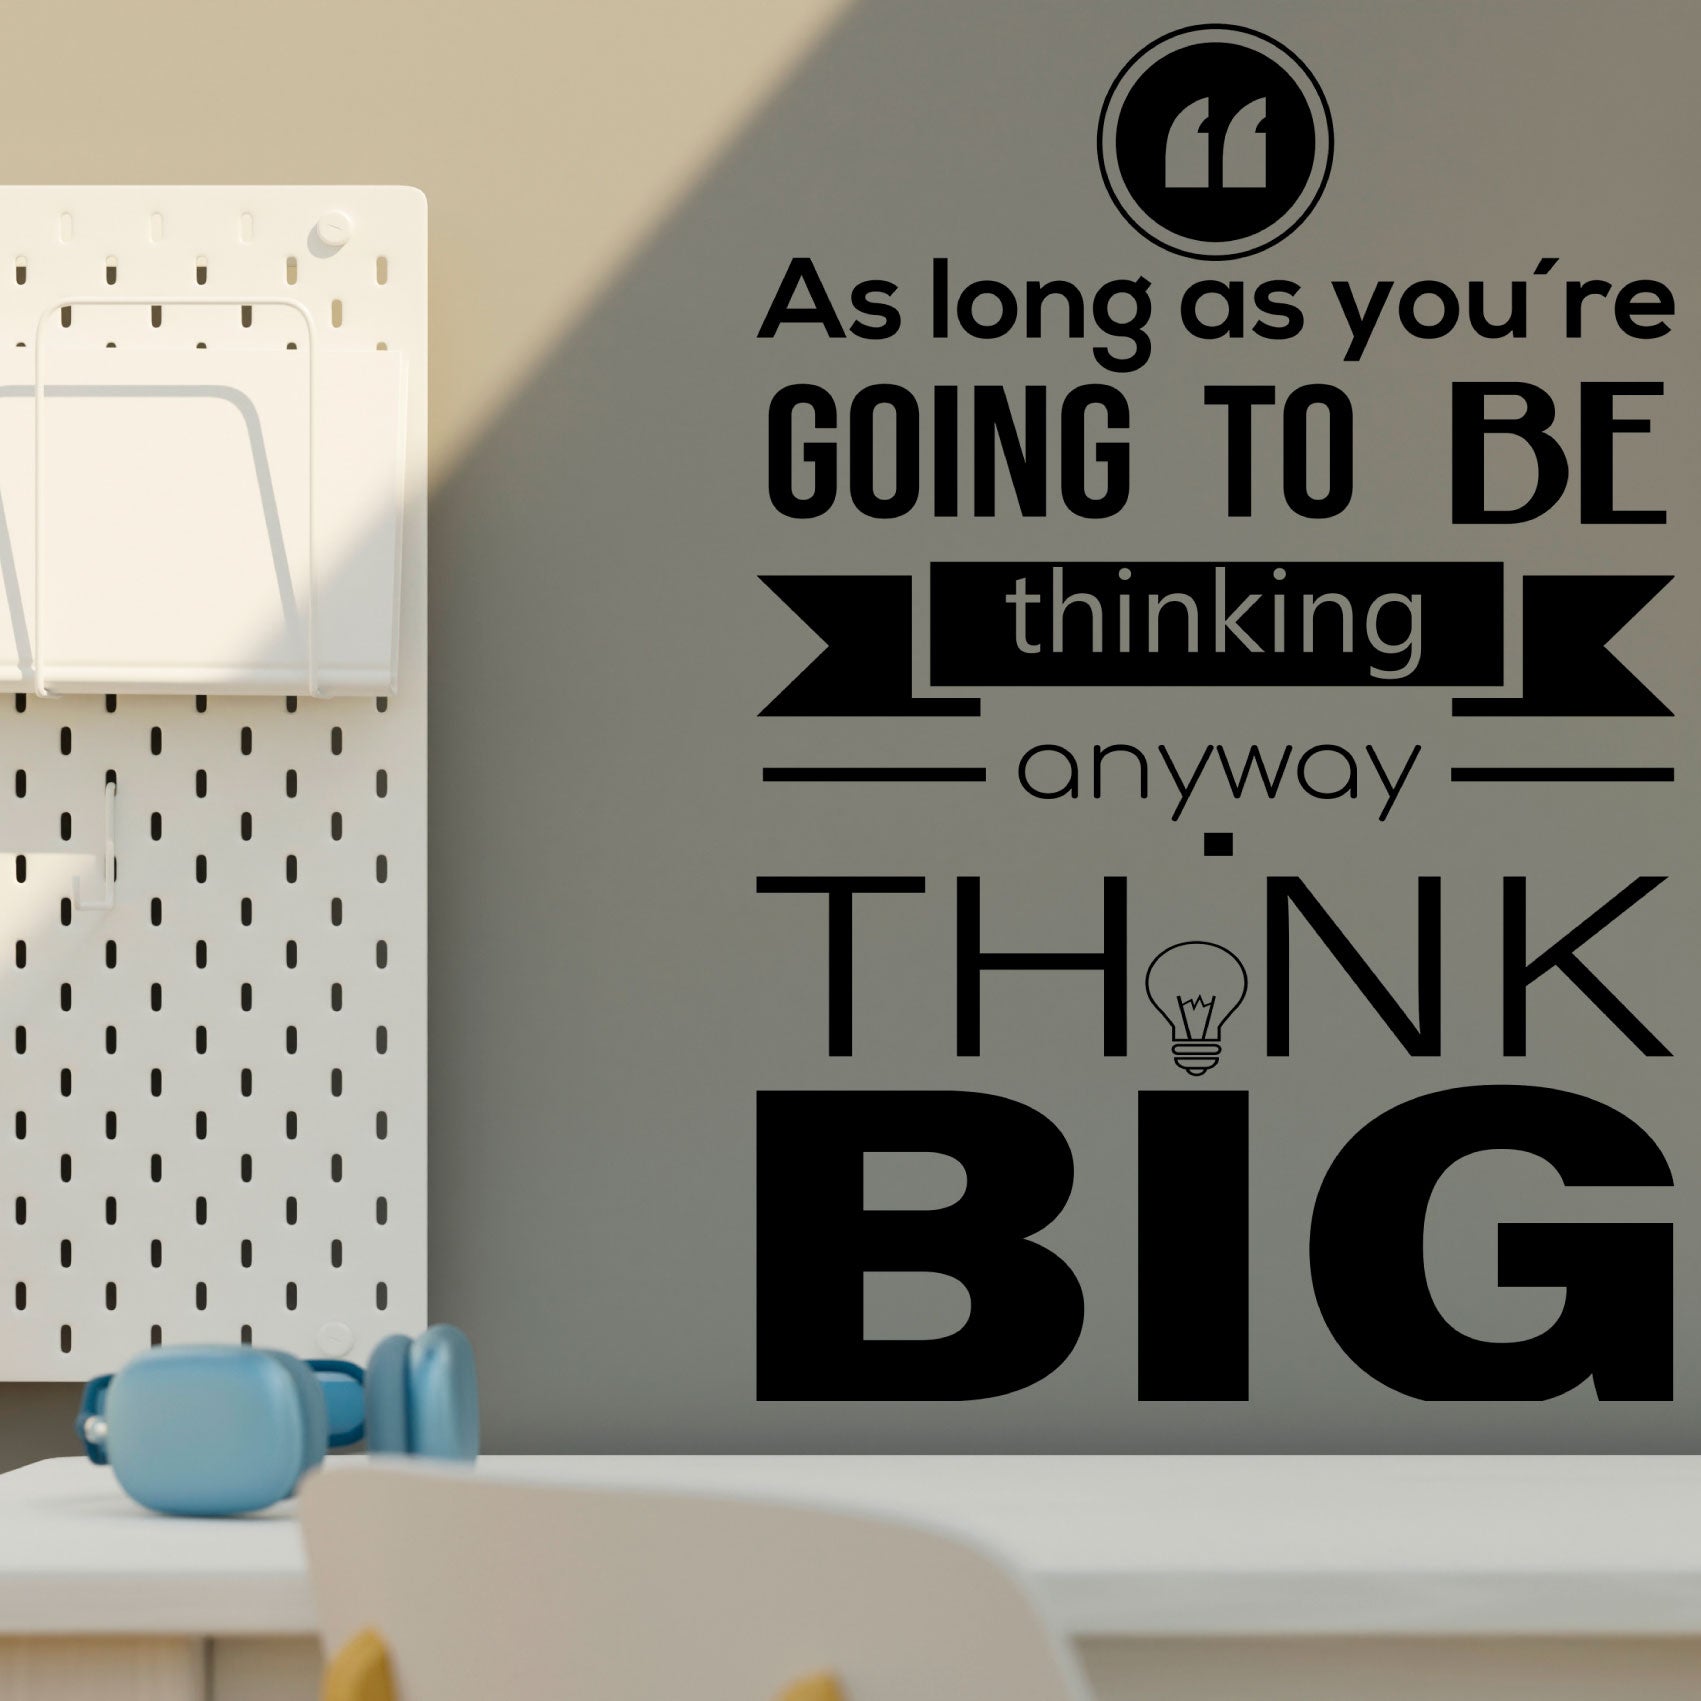 VINIL DECORATIVO AS LONG AS YOU´RE GONING TO BE THINKING ANYWAY THINK BIG 60 X 90 CM